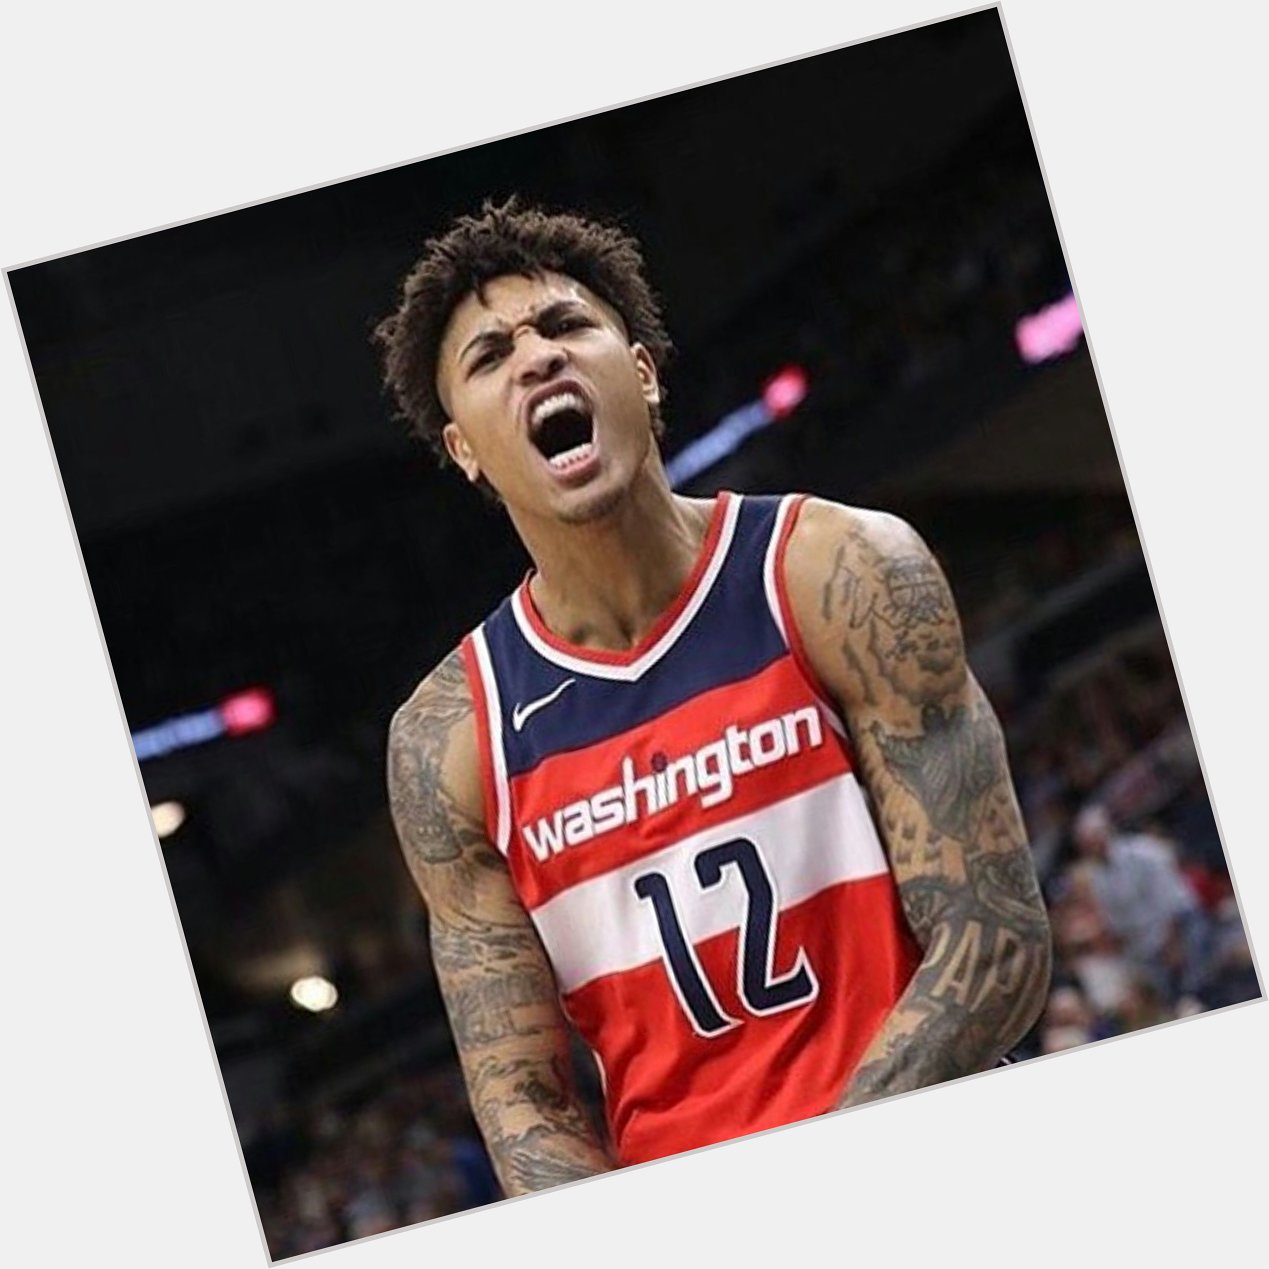 Happy birthday to Wizards young stud Kelly Oubre!  